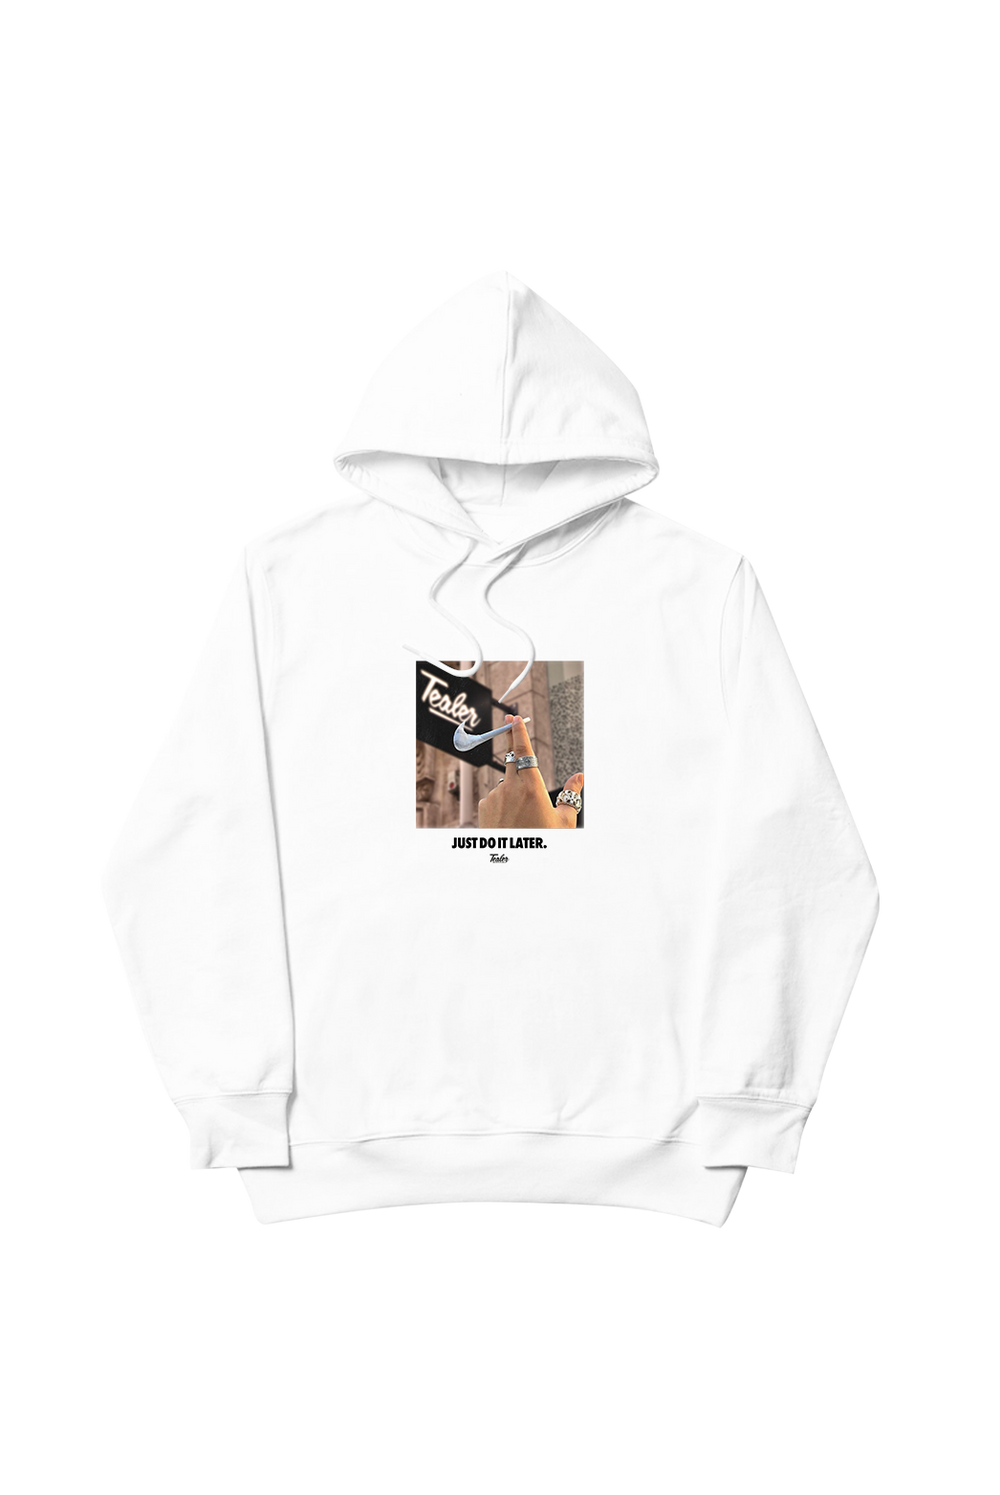 Tealer nike just do it later, Hoodie White